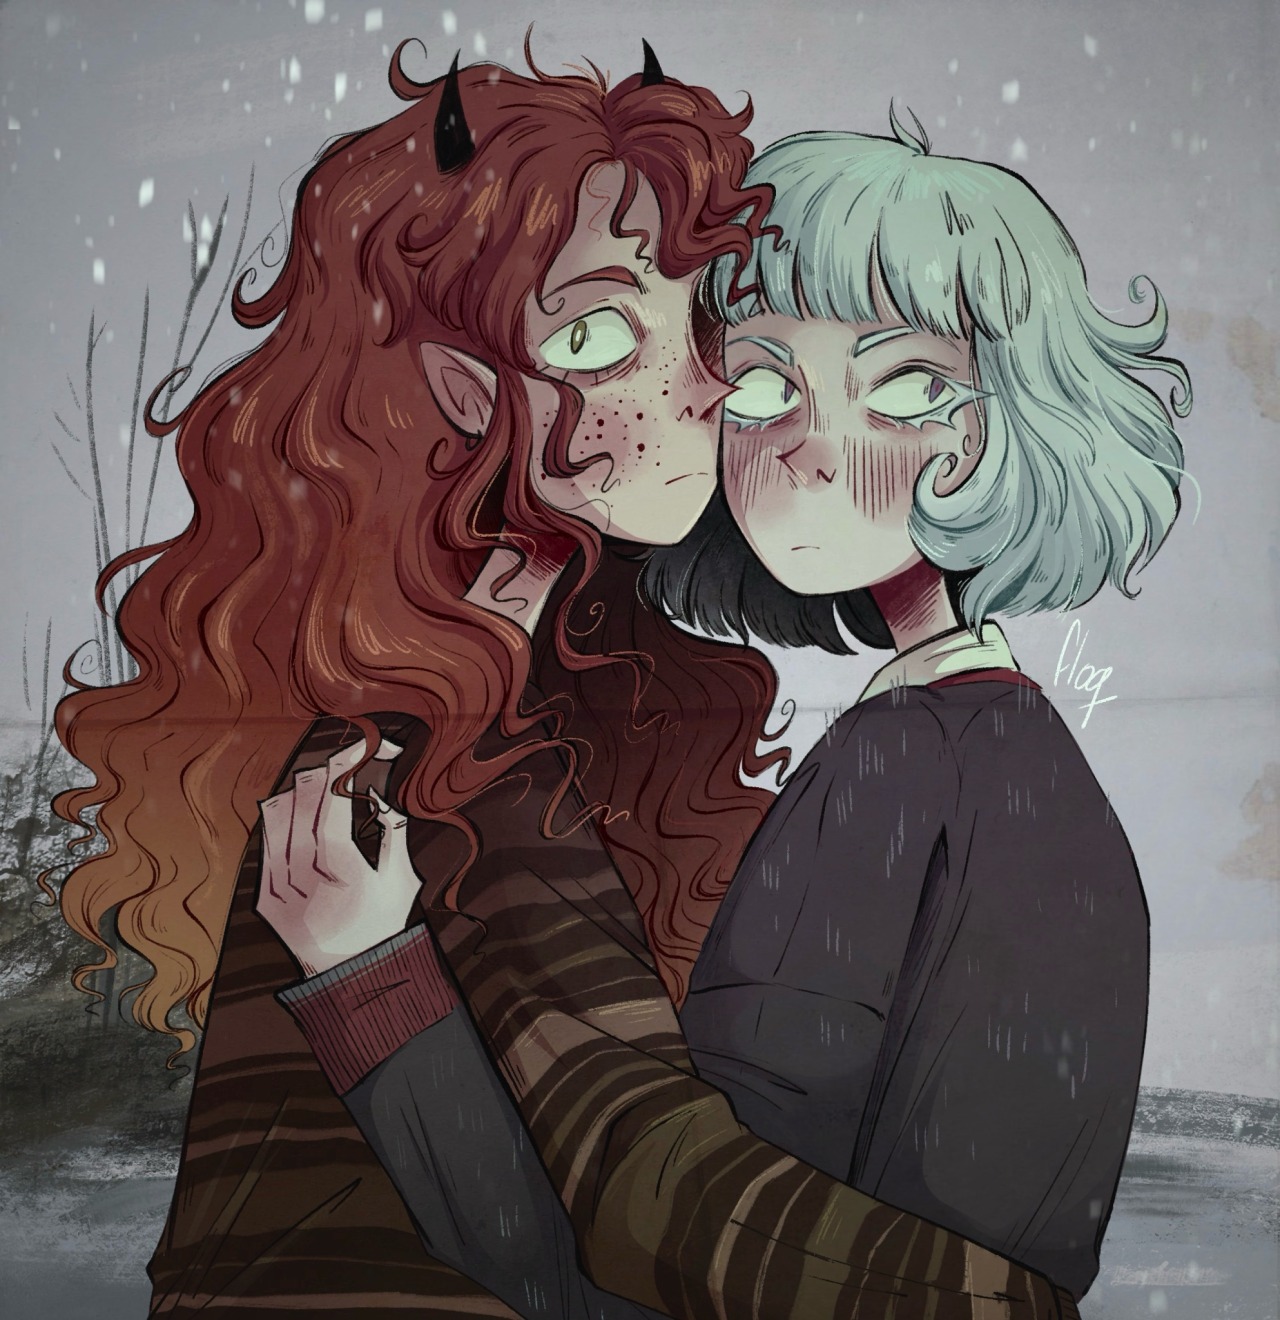 Medium shot digital drawing of two girls hugging while waringly looking at theirs surroundings, they are standing in the wilderness in front of a dead tree and some bushes while snow slowly fall on top of them. The girl to the left, my OC Anne Espinoza, is a girl with freckled fair skin and long, wavy read hair; she has a pair of black horns on her head, pointy ears and green eyes with white pupils. She is the taller of the two and is wearing a brown sweater with green and cream stripes. The girl on the right, my OC Violeta Eberhardt,  is a slim, short girl with albinism. She has pale white skin, white straight hair styled as a short bob and purple-ish blue eyes with white eyelashes. She´s wearing a school uniform composed of a gray sweater with red accent. Both girls faces touching while they embrace eachother, causing Anne´s left eye to be completely obscured by the angle. The images is painted with muted to give an eerie vibe to the viewer.